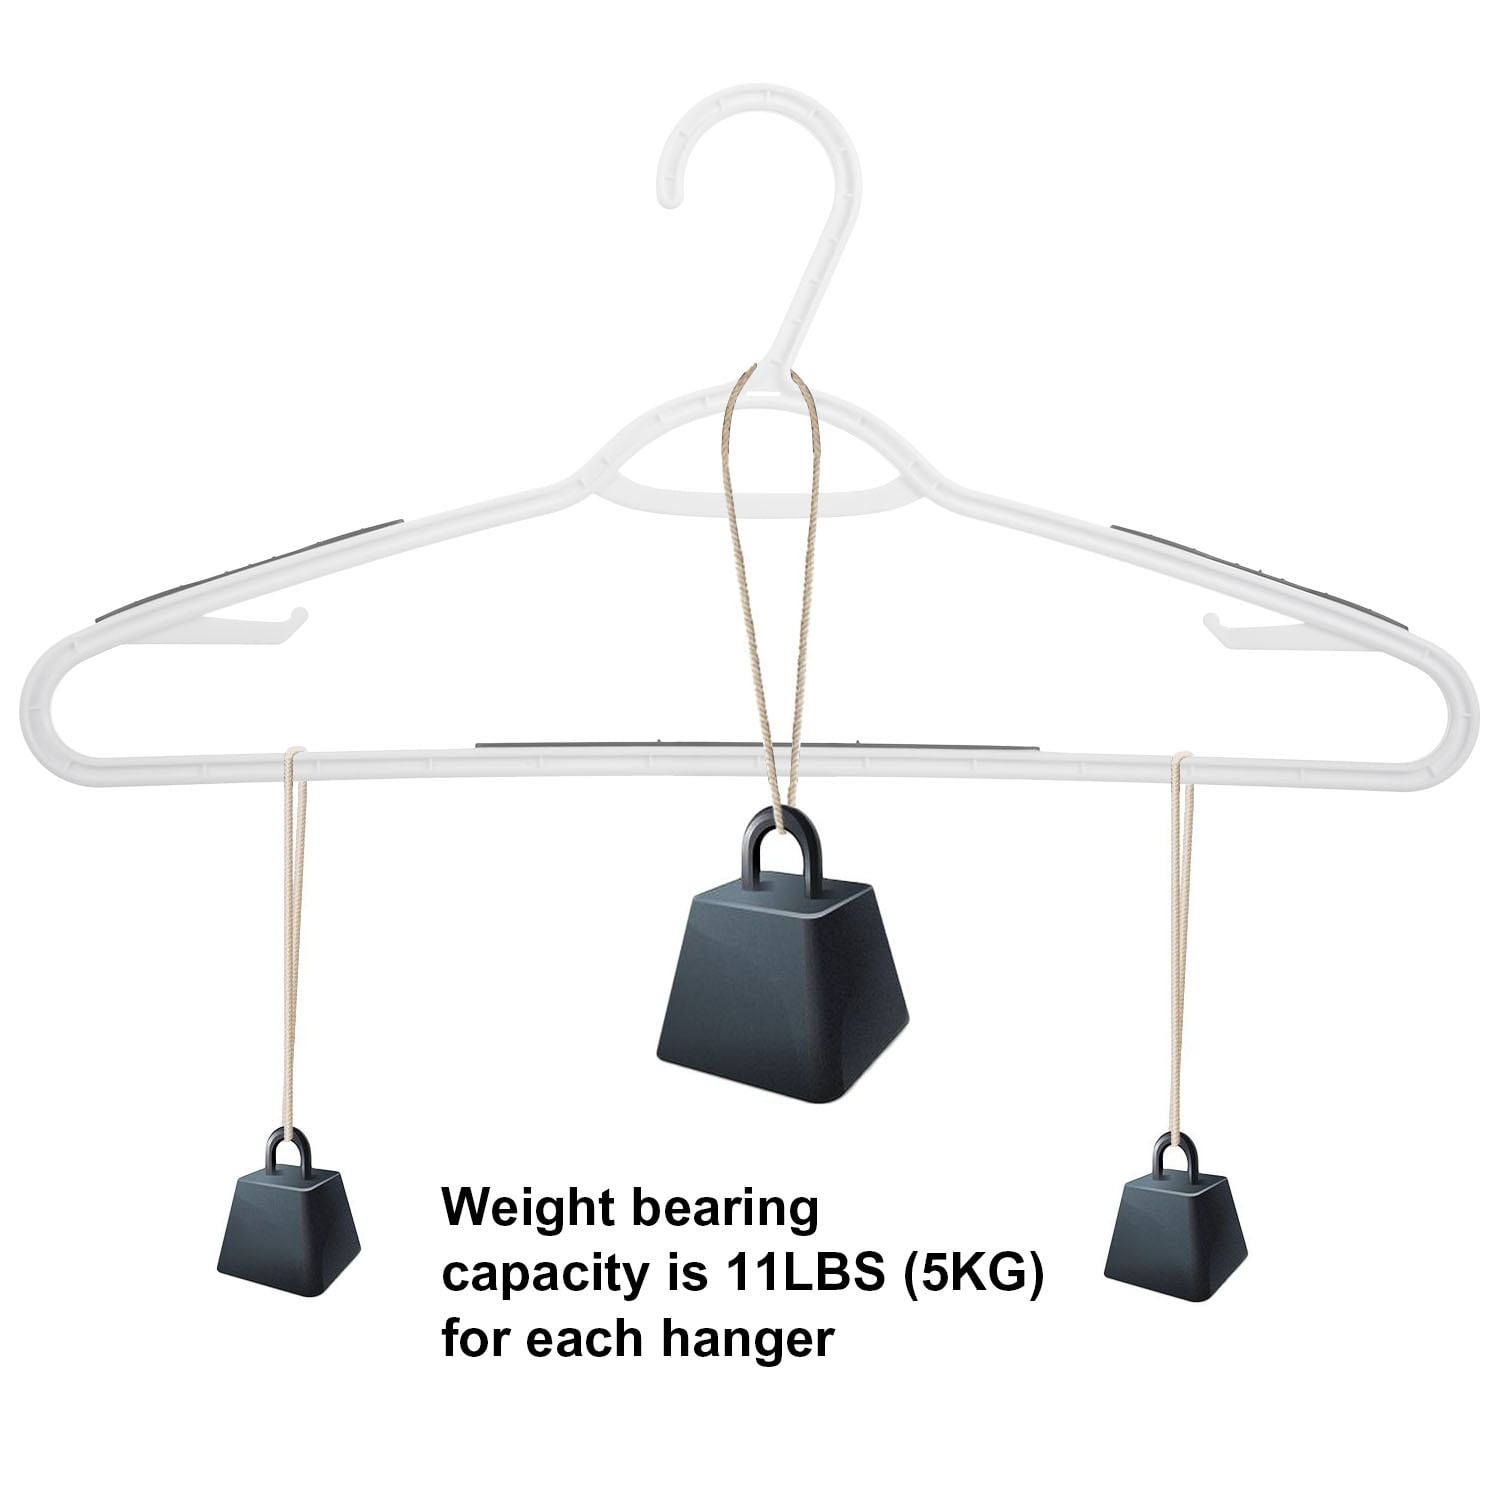 Perfecasa Extra Non Slip Plastic Clothes Hangers 30 Pack, with Sure Gr